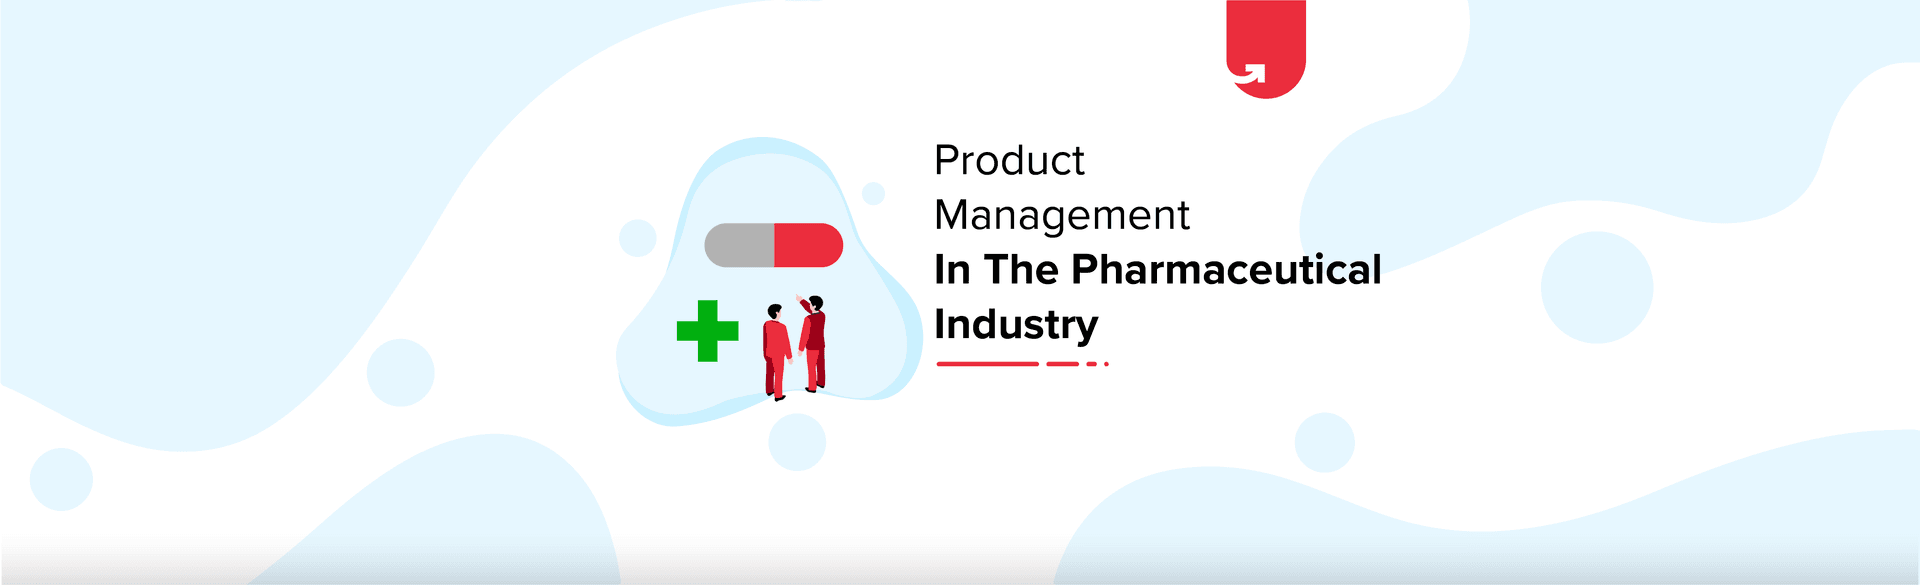 Product Management in the Pharmaceutical Industry: Roles, Career Importance &#038; Skillset